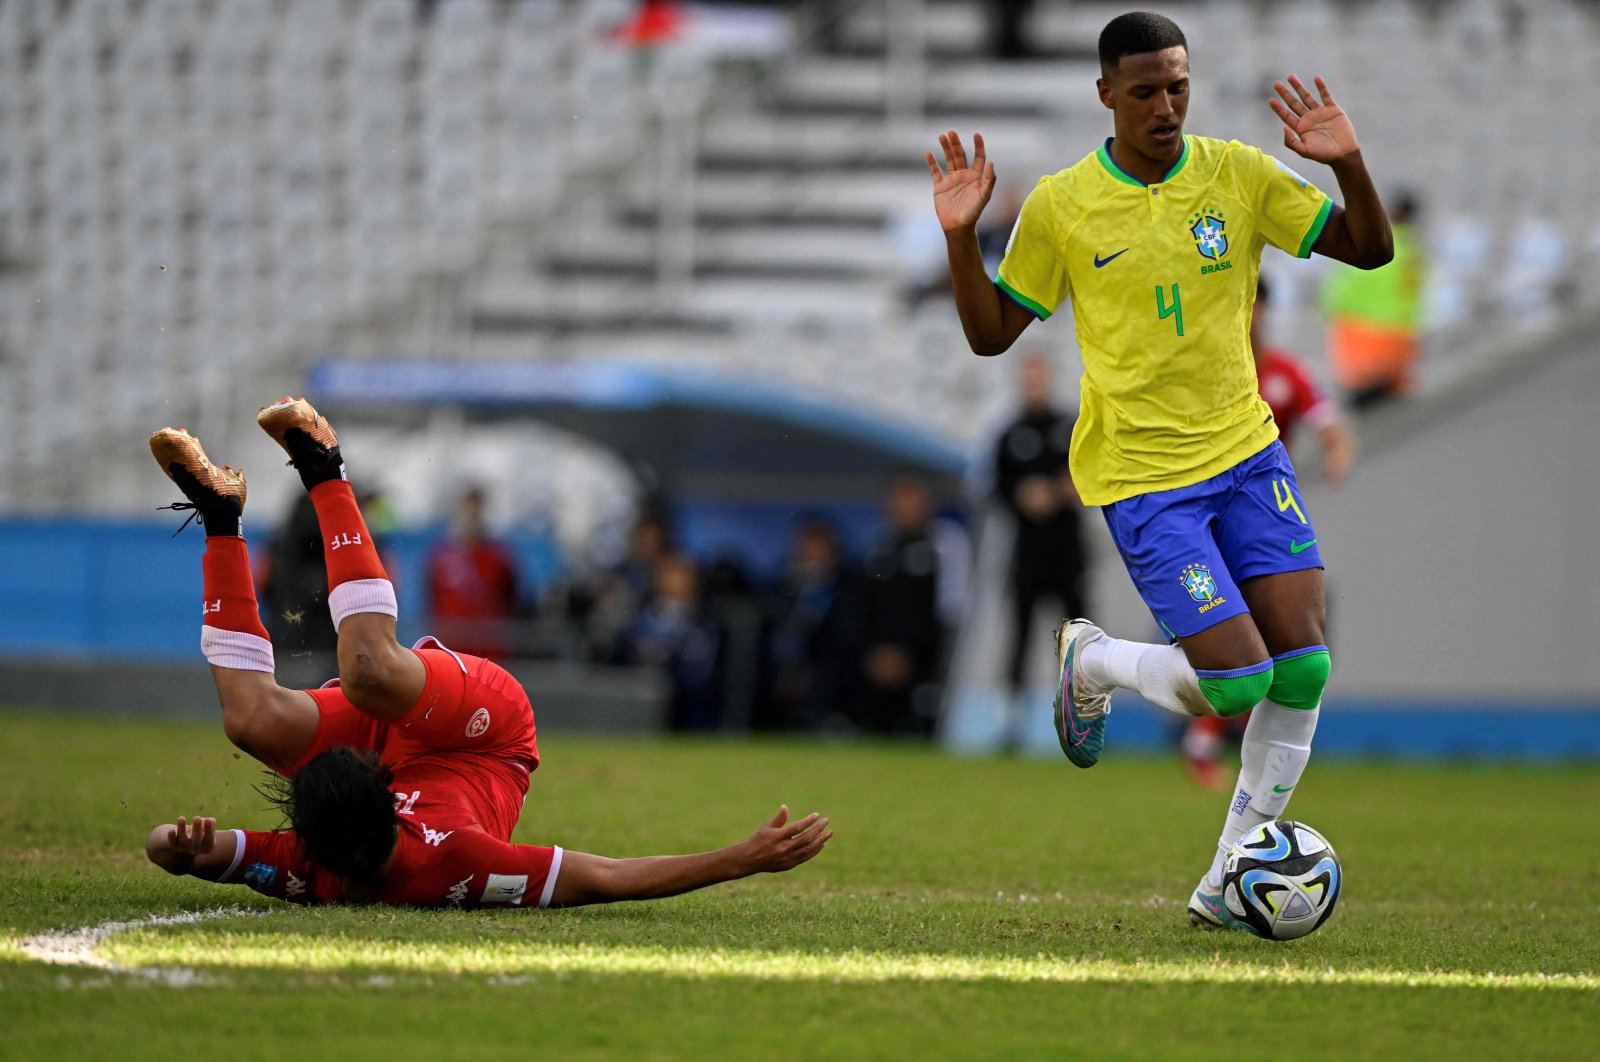 Brazil&#039;s defender Robert Renan (R) reacts after a foul to Tunisia&#039;s forward Mohamed Dhaoui (L) during the Argentina 2023 U-20 World Cup round of 16 football match between Brazil and Tunisia at the Diego Armando Maradona stadium, La Plata, Argentina, May 31, 2023. (AFP Photo)